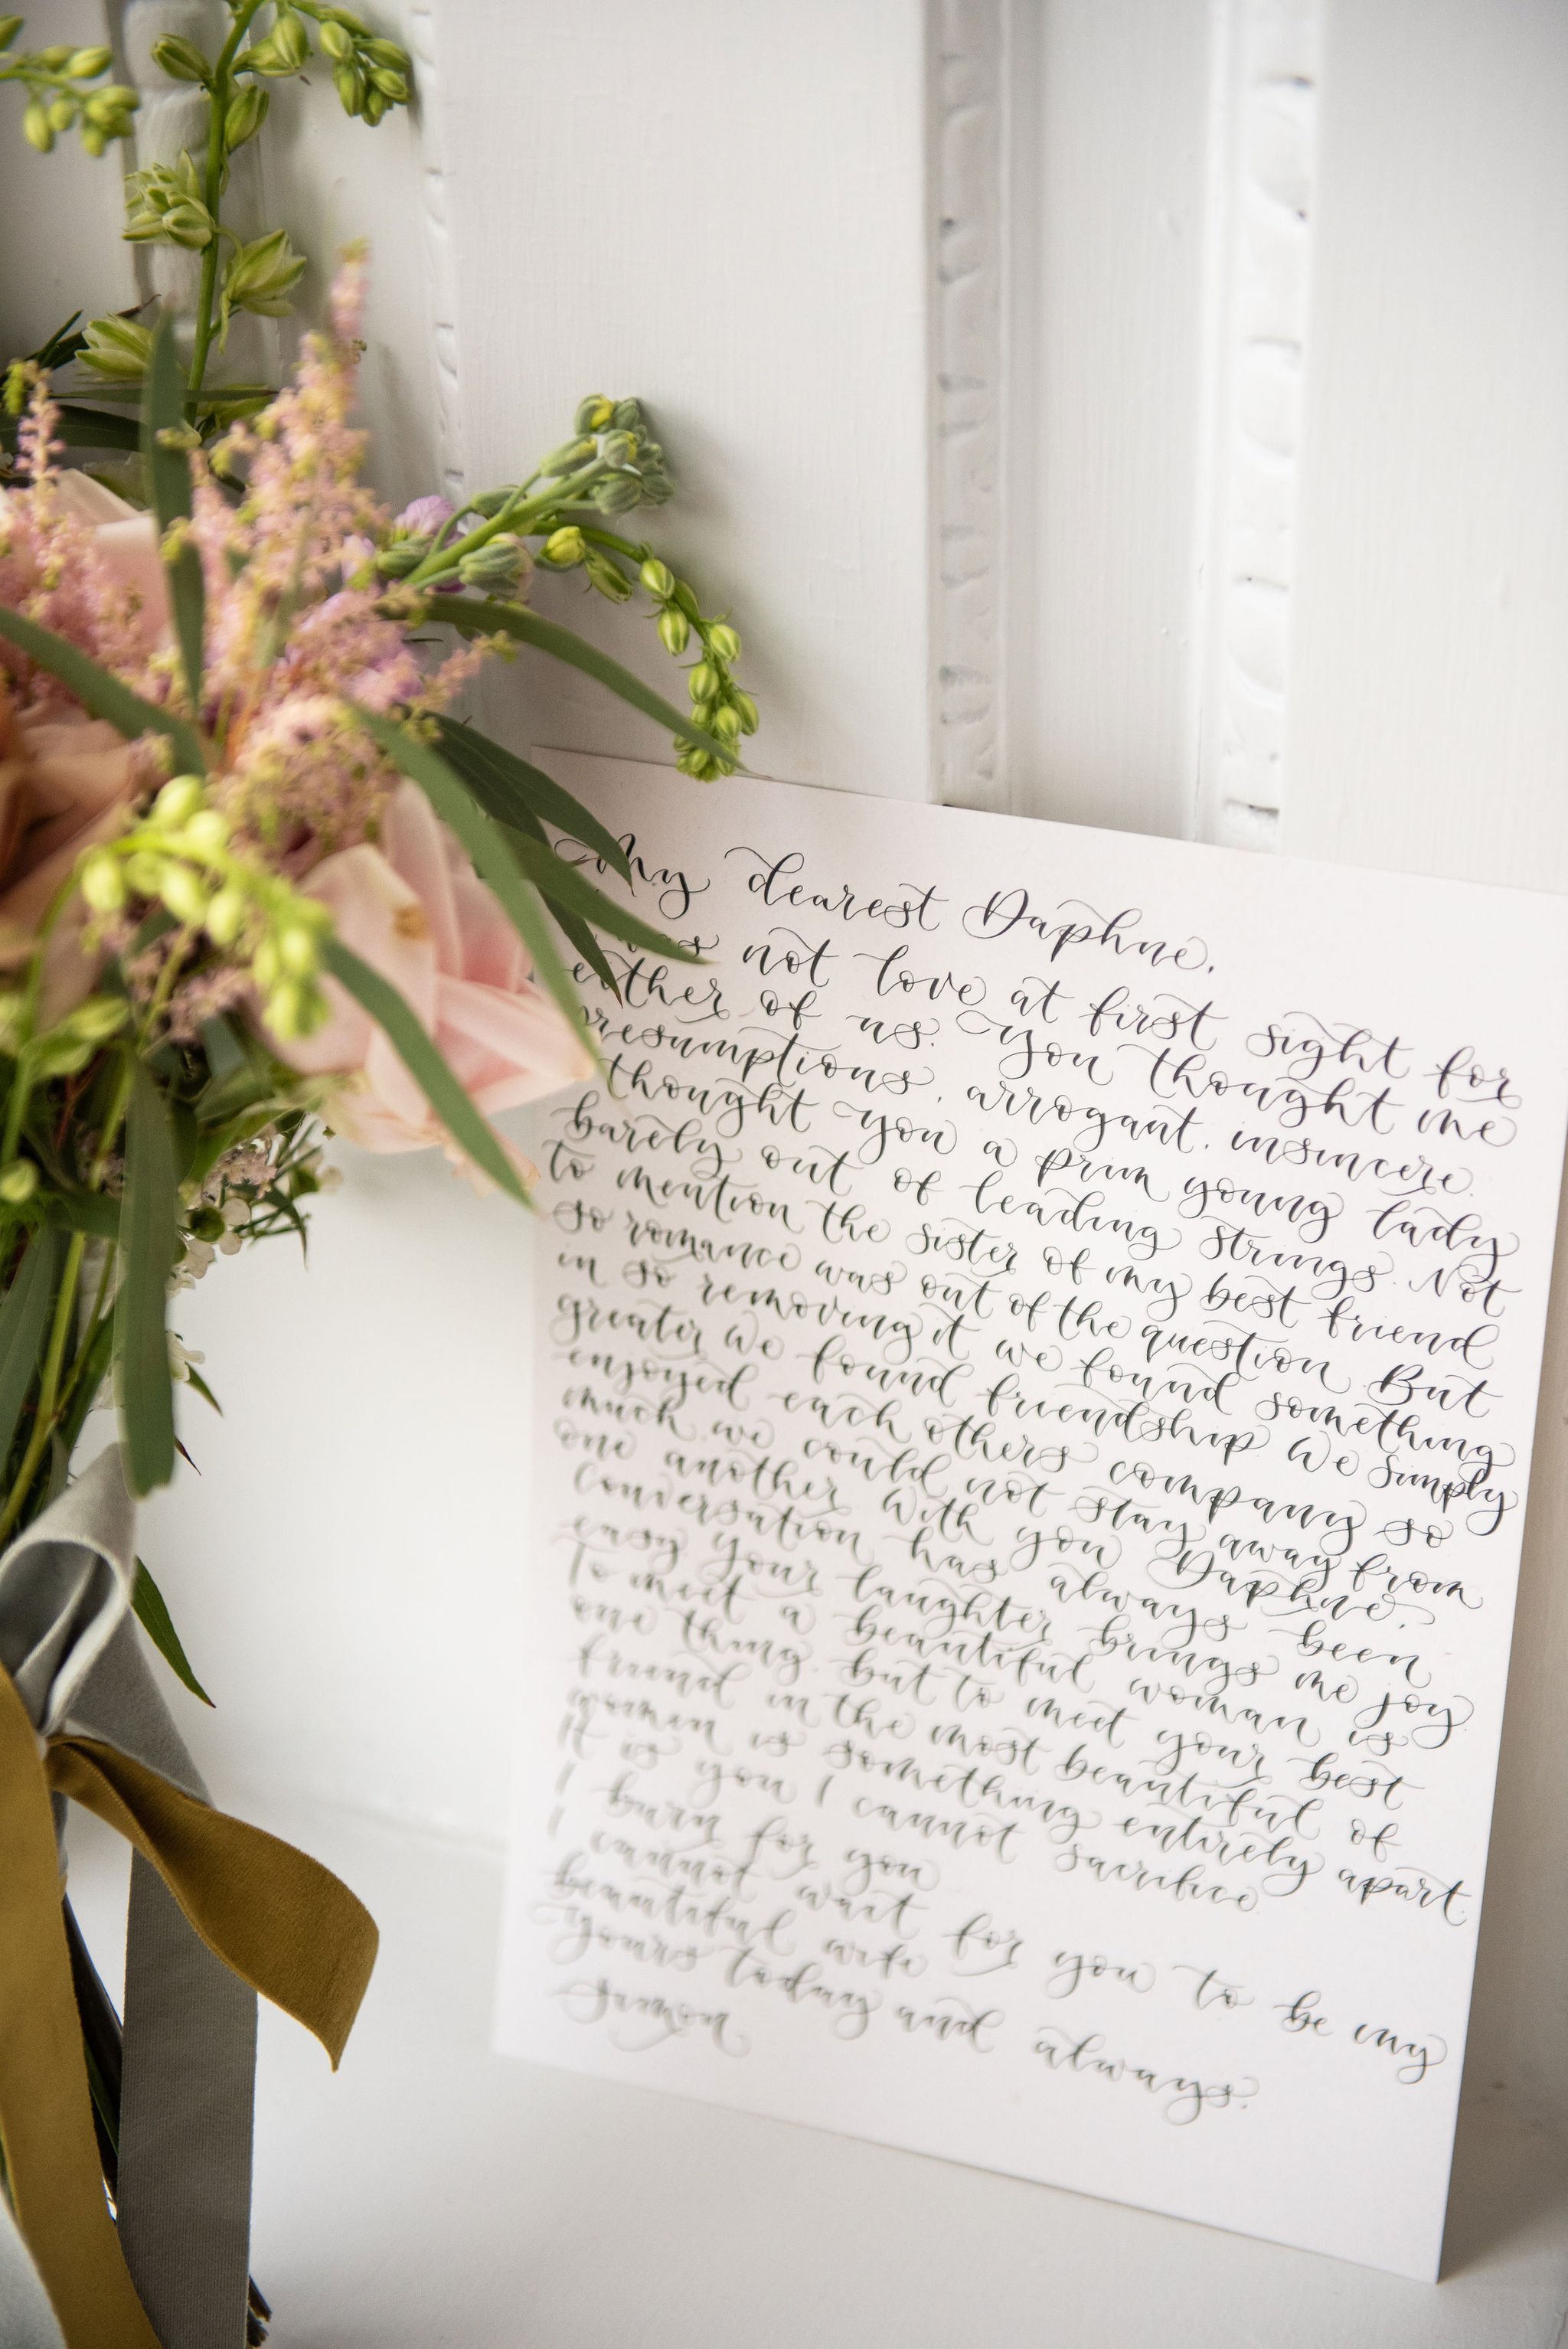 Bridgerton wedding stationery calligraphy letter to Daphne from Simon on the wedding day with quotes from Bridgerton - Calligraphy Letter to bride on morning of the wedding.jpg